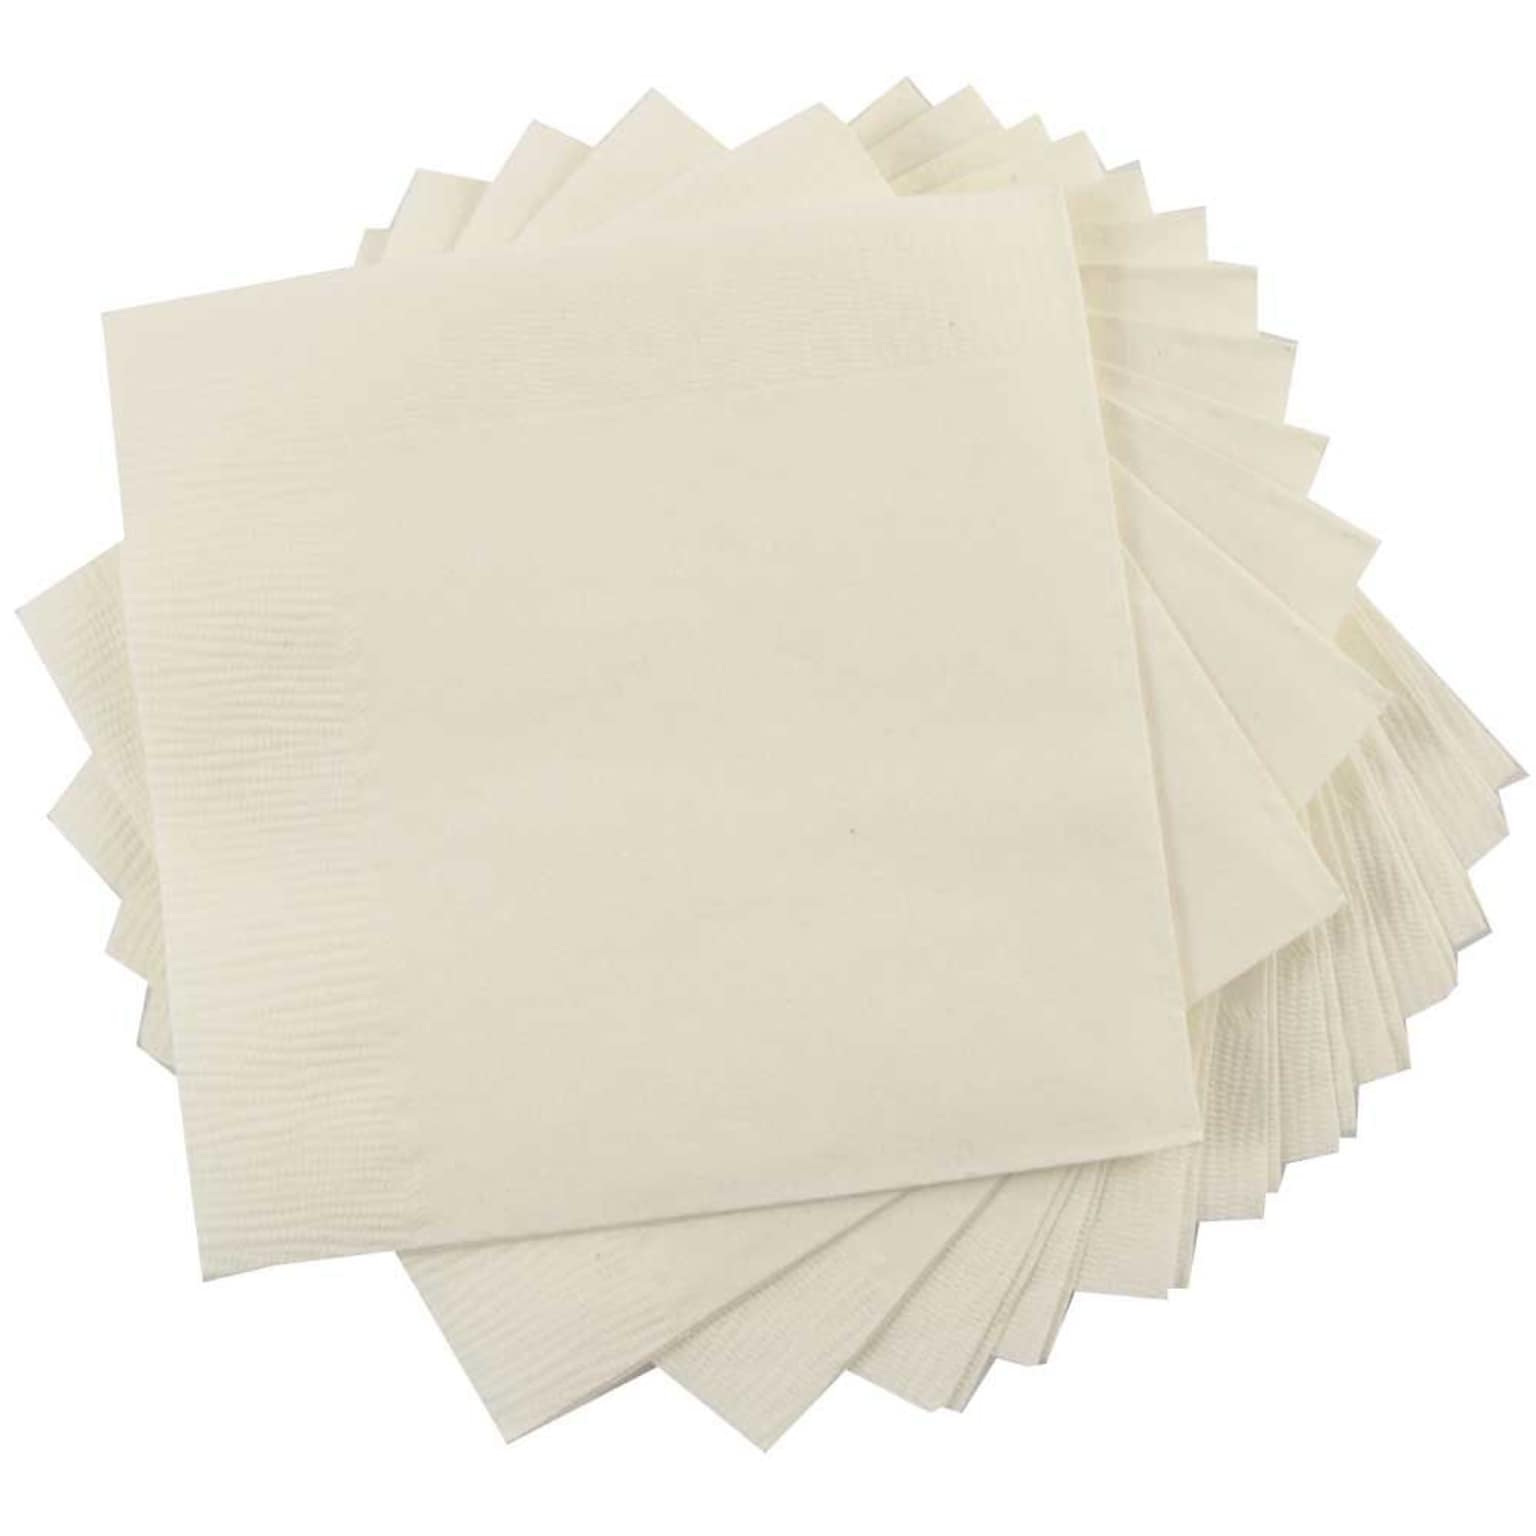 JAM Paper Lunch Napkin, 2-ply, Ivory, 50 Napkins/Pack (6255620722)